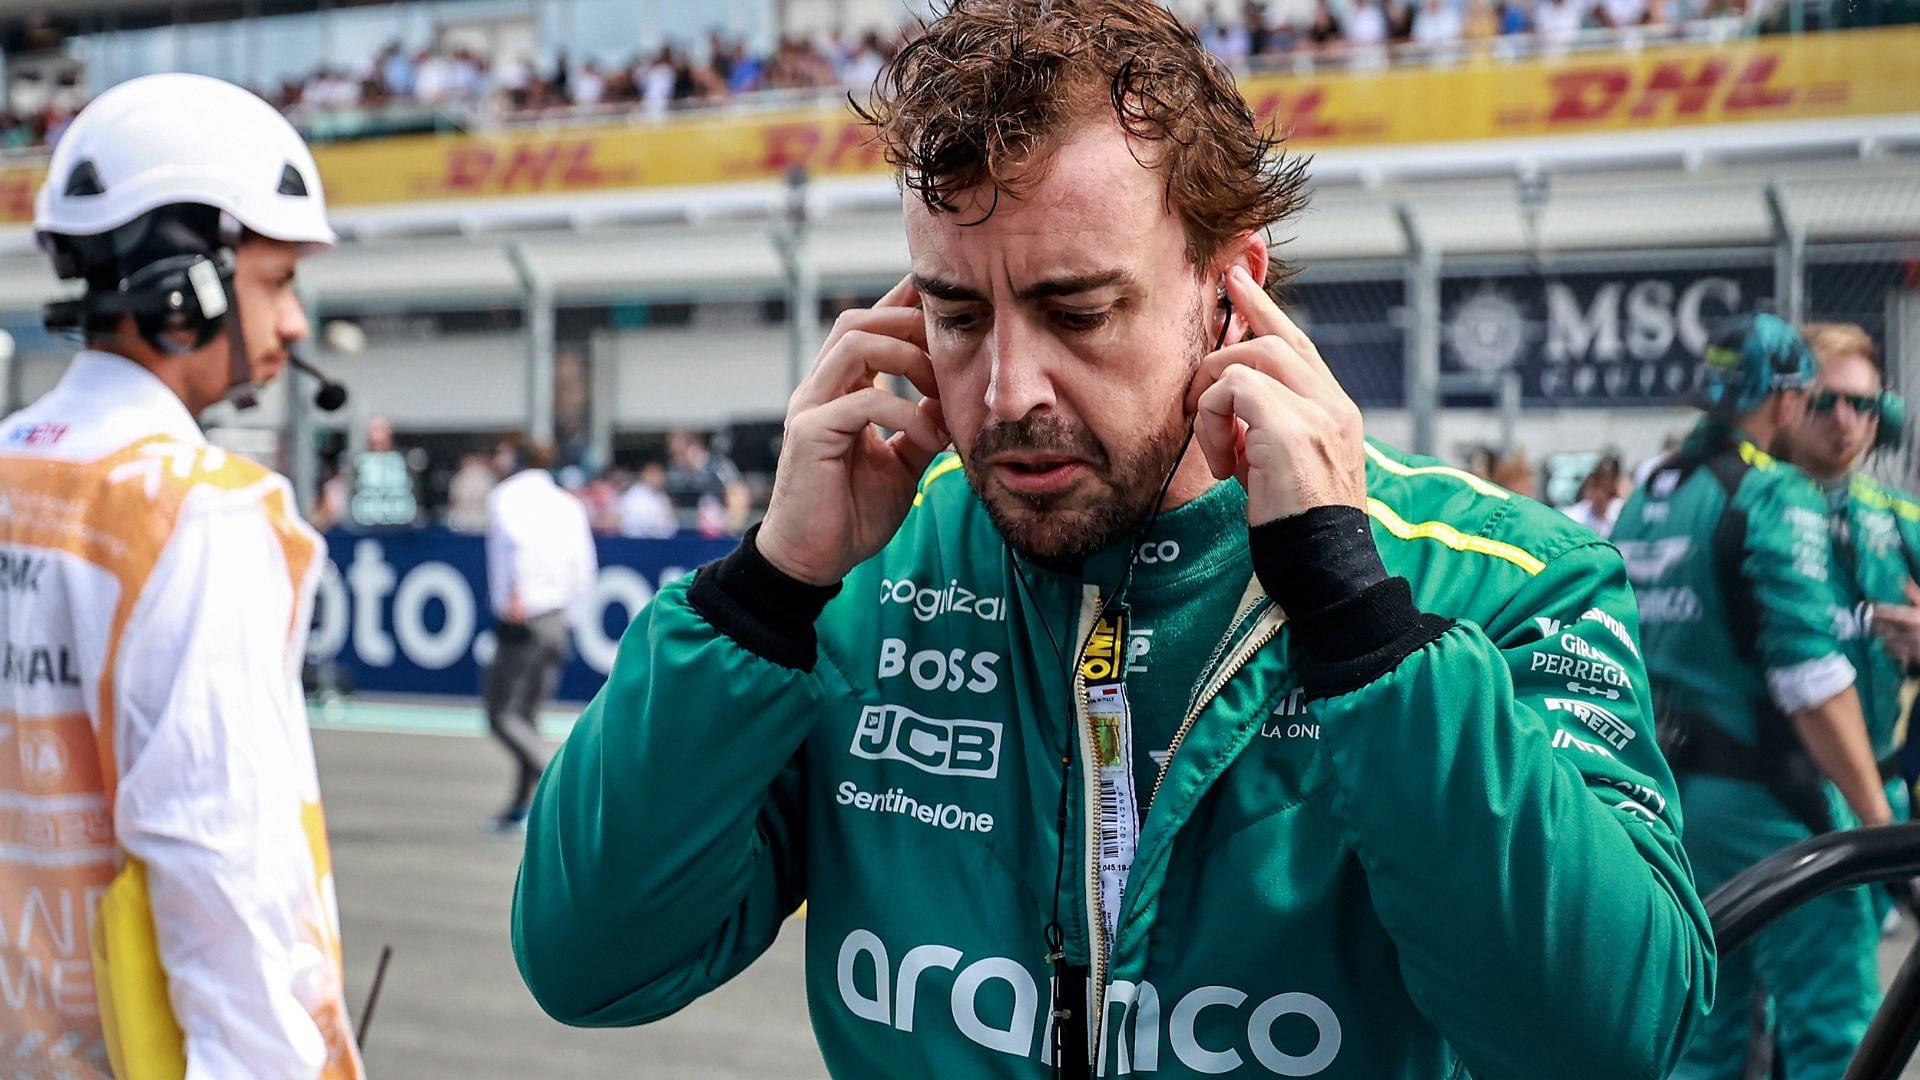 Aston Martin Engineer Reveals Where Will Fernando Alonso Be at His Strongest in the Upcoming Triple Header